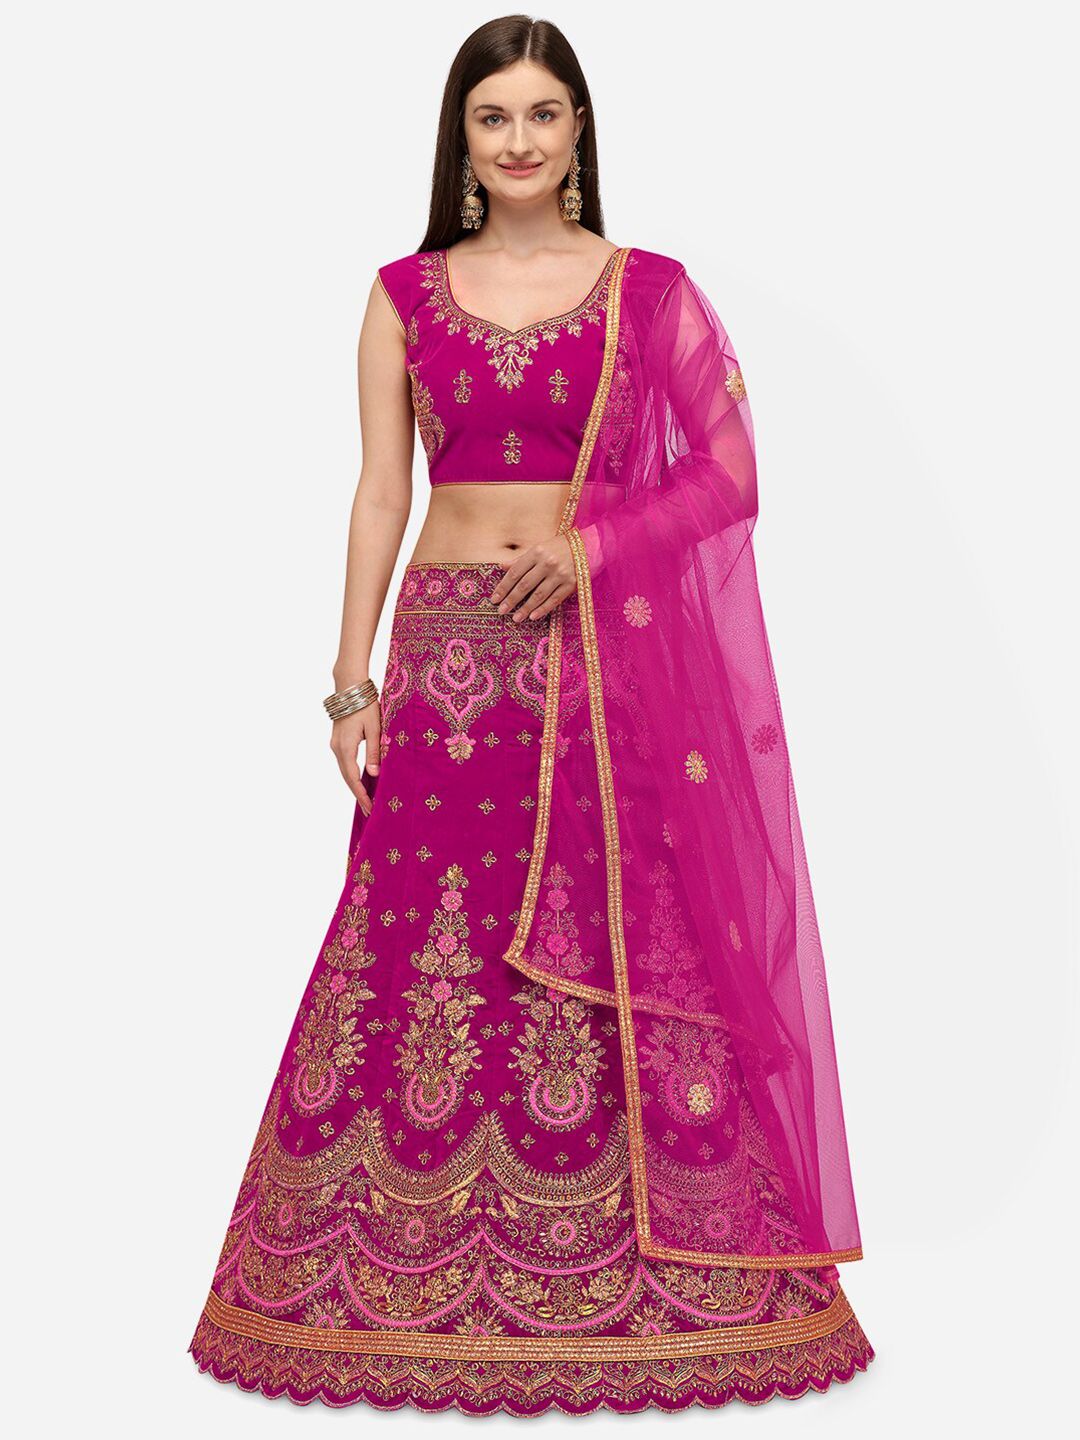 Rajesh Silk Mills Pink & Gold Semi-Stitched Lehenga & Unstitched Blouse With Dupatta Price in India